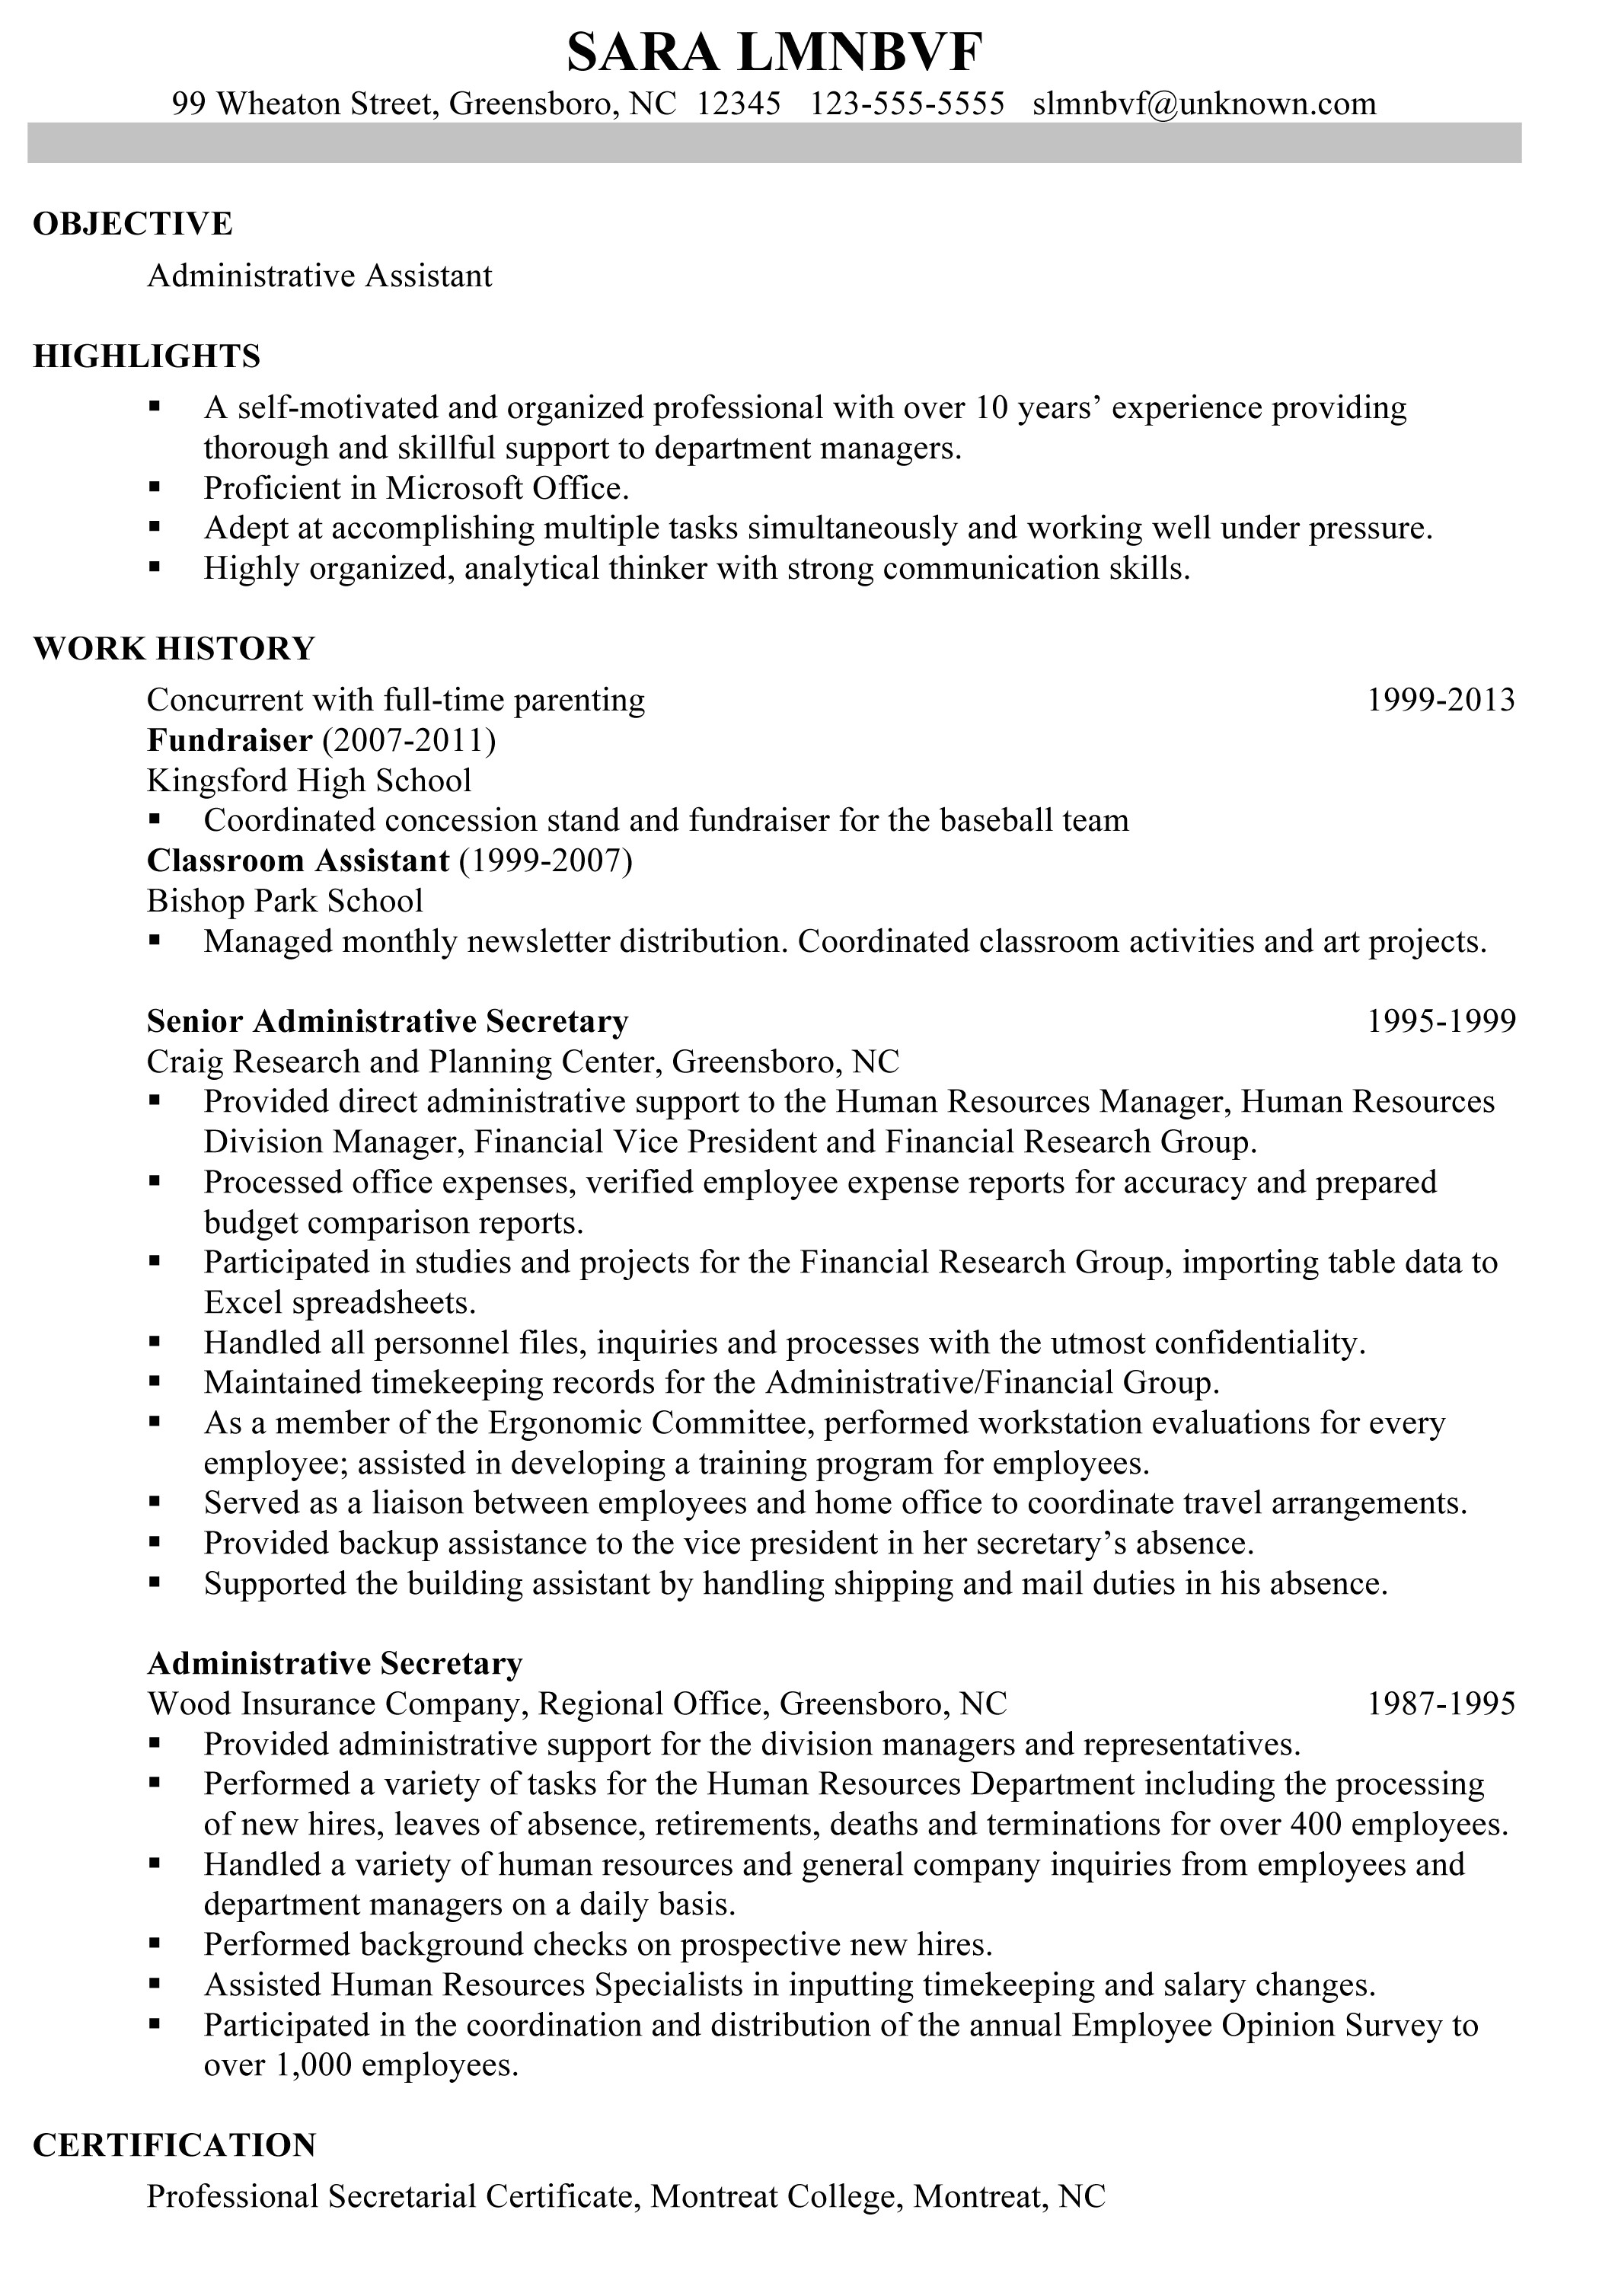 chronological resume sample administrative assistant